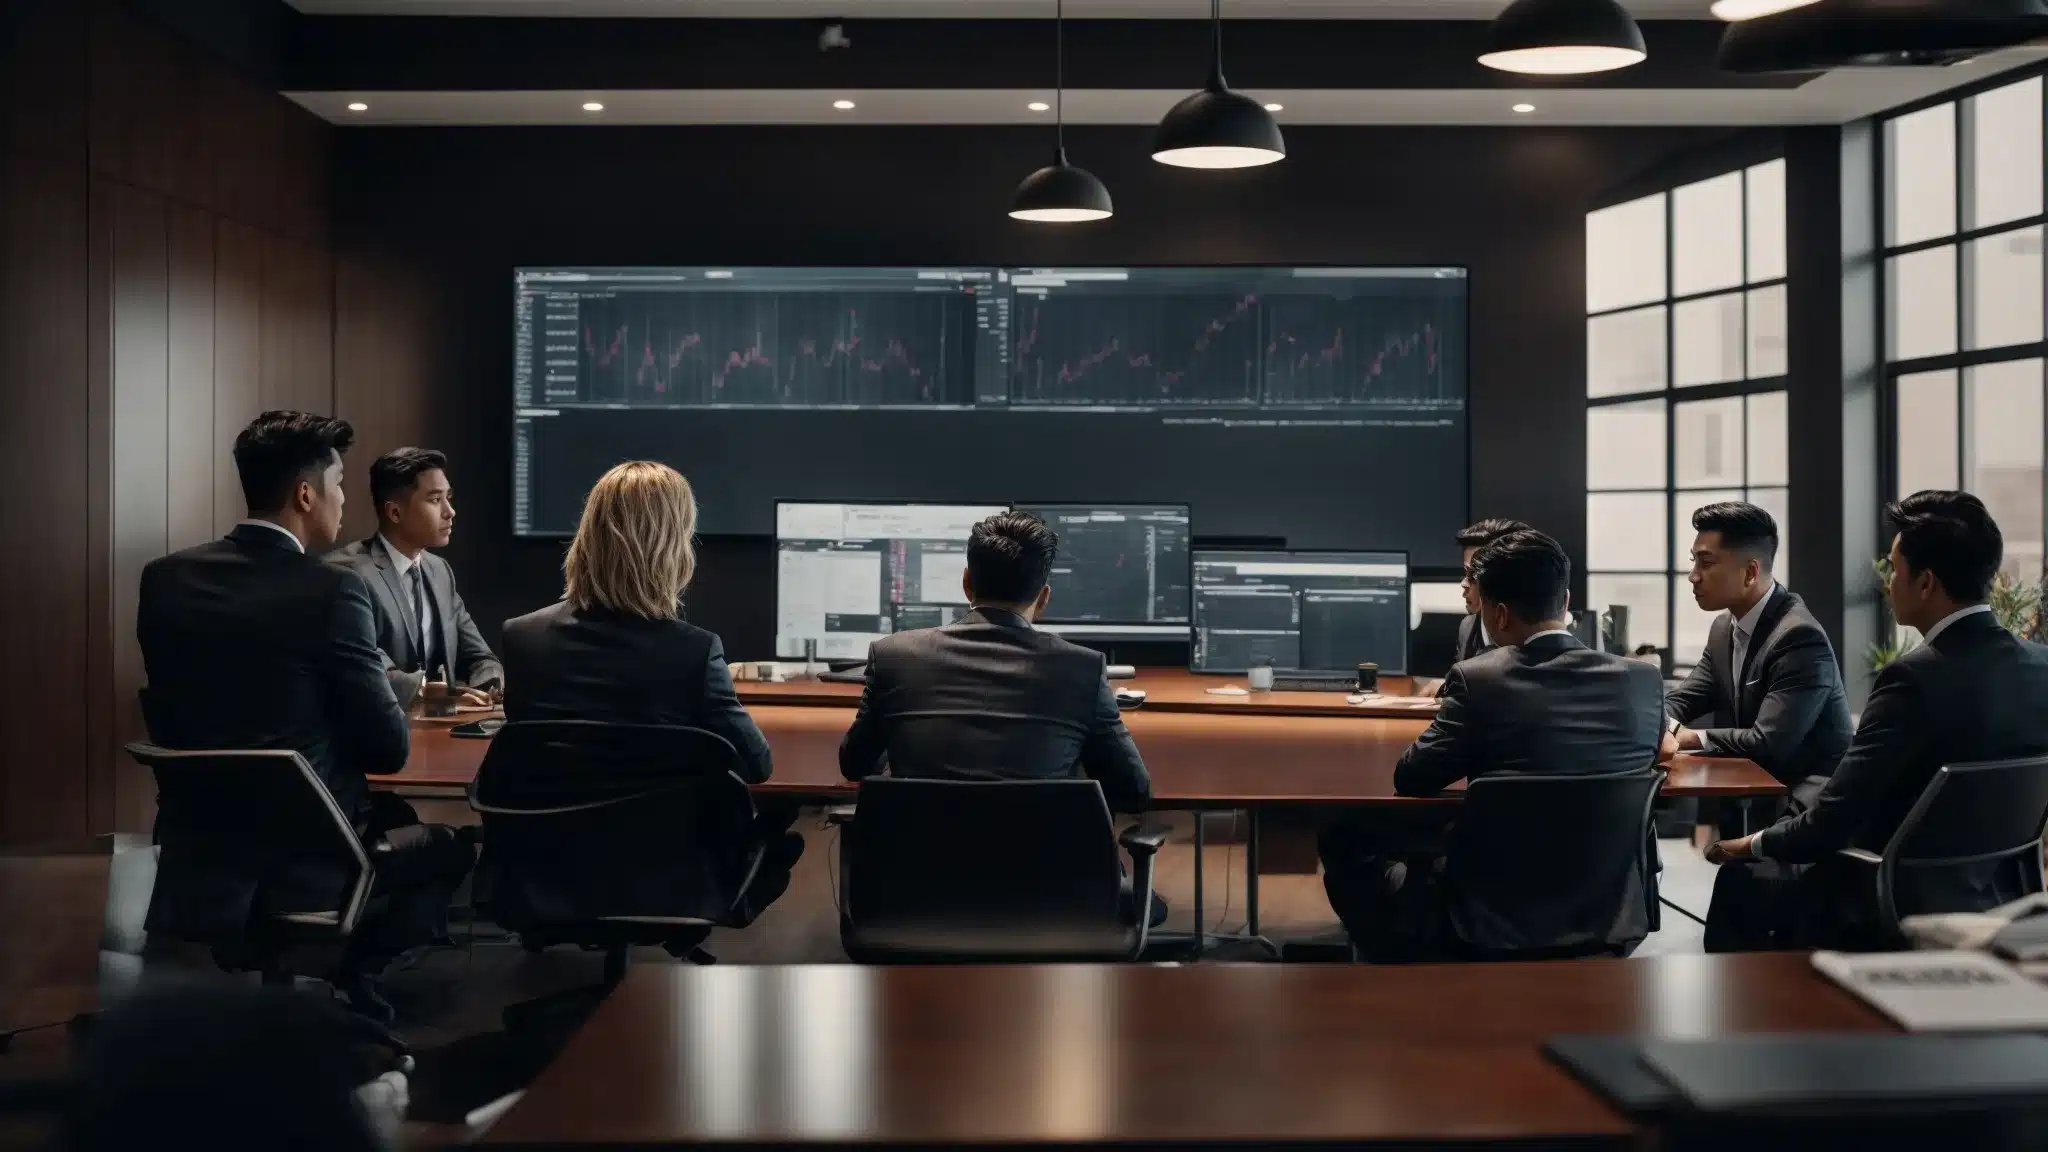 A Dedicated Team Gathers Around A Conference Table, Intently Discussing Strategies Over Open Laptops And Digital Marketing Analytics Displayed On A Large Screen.